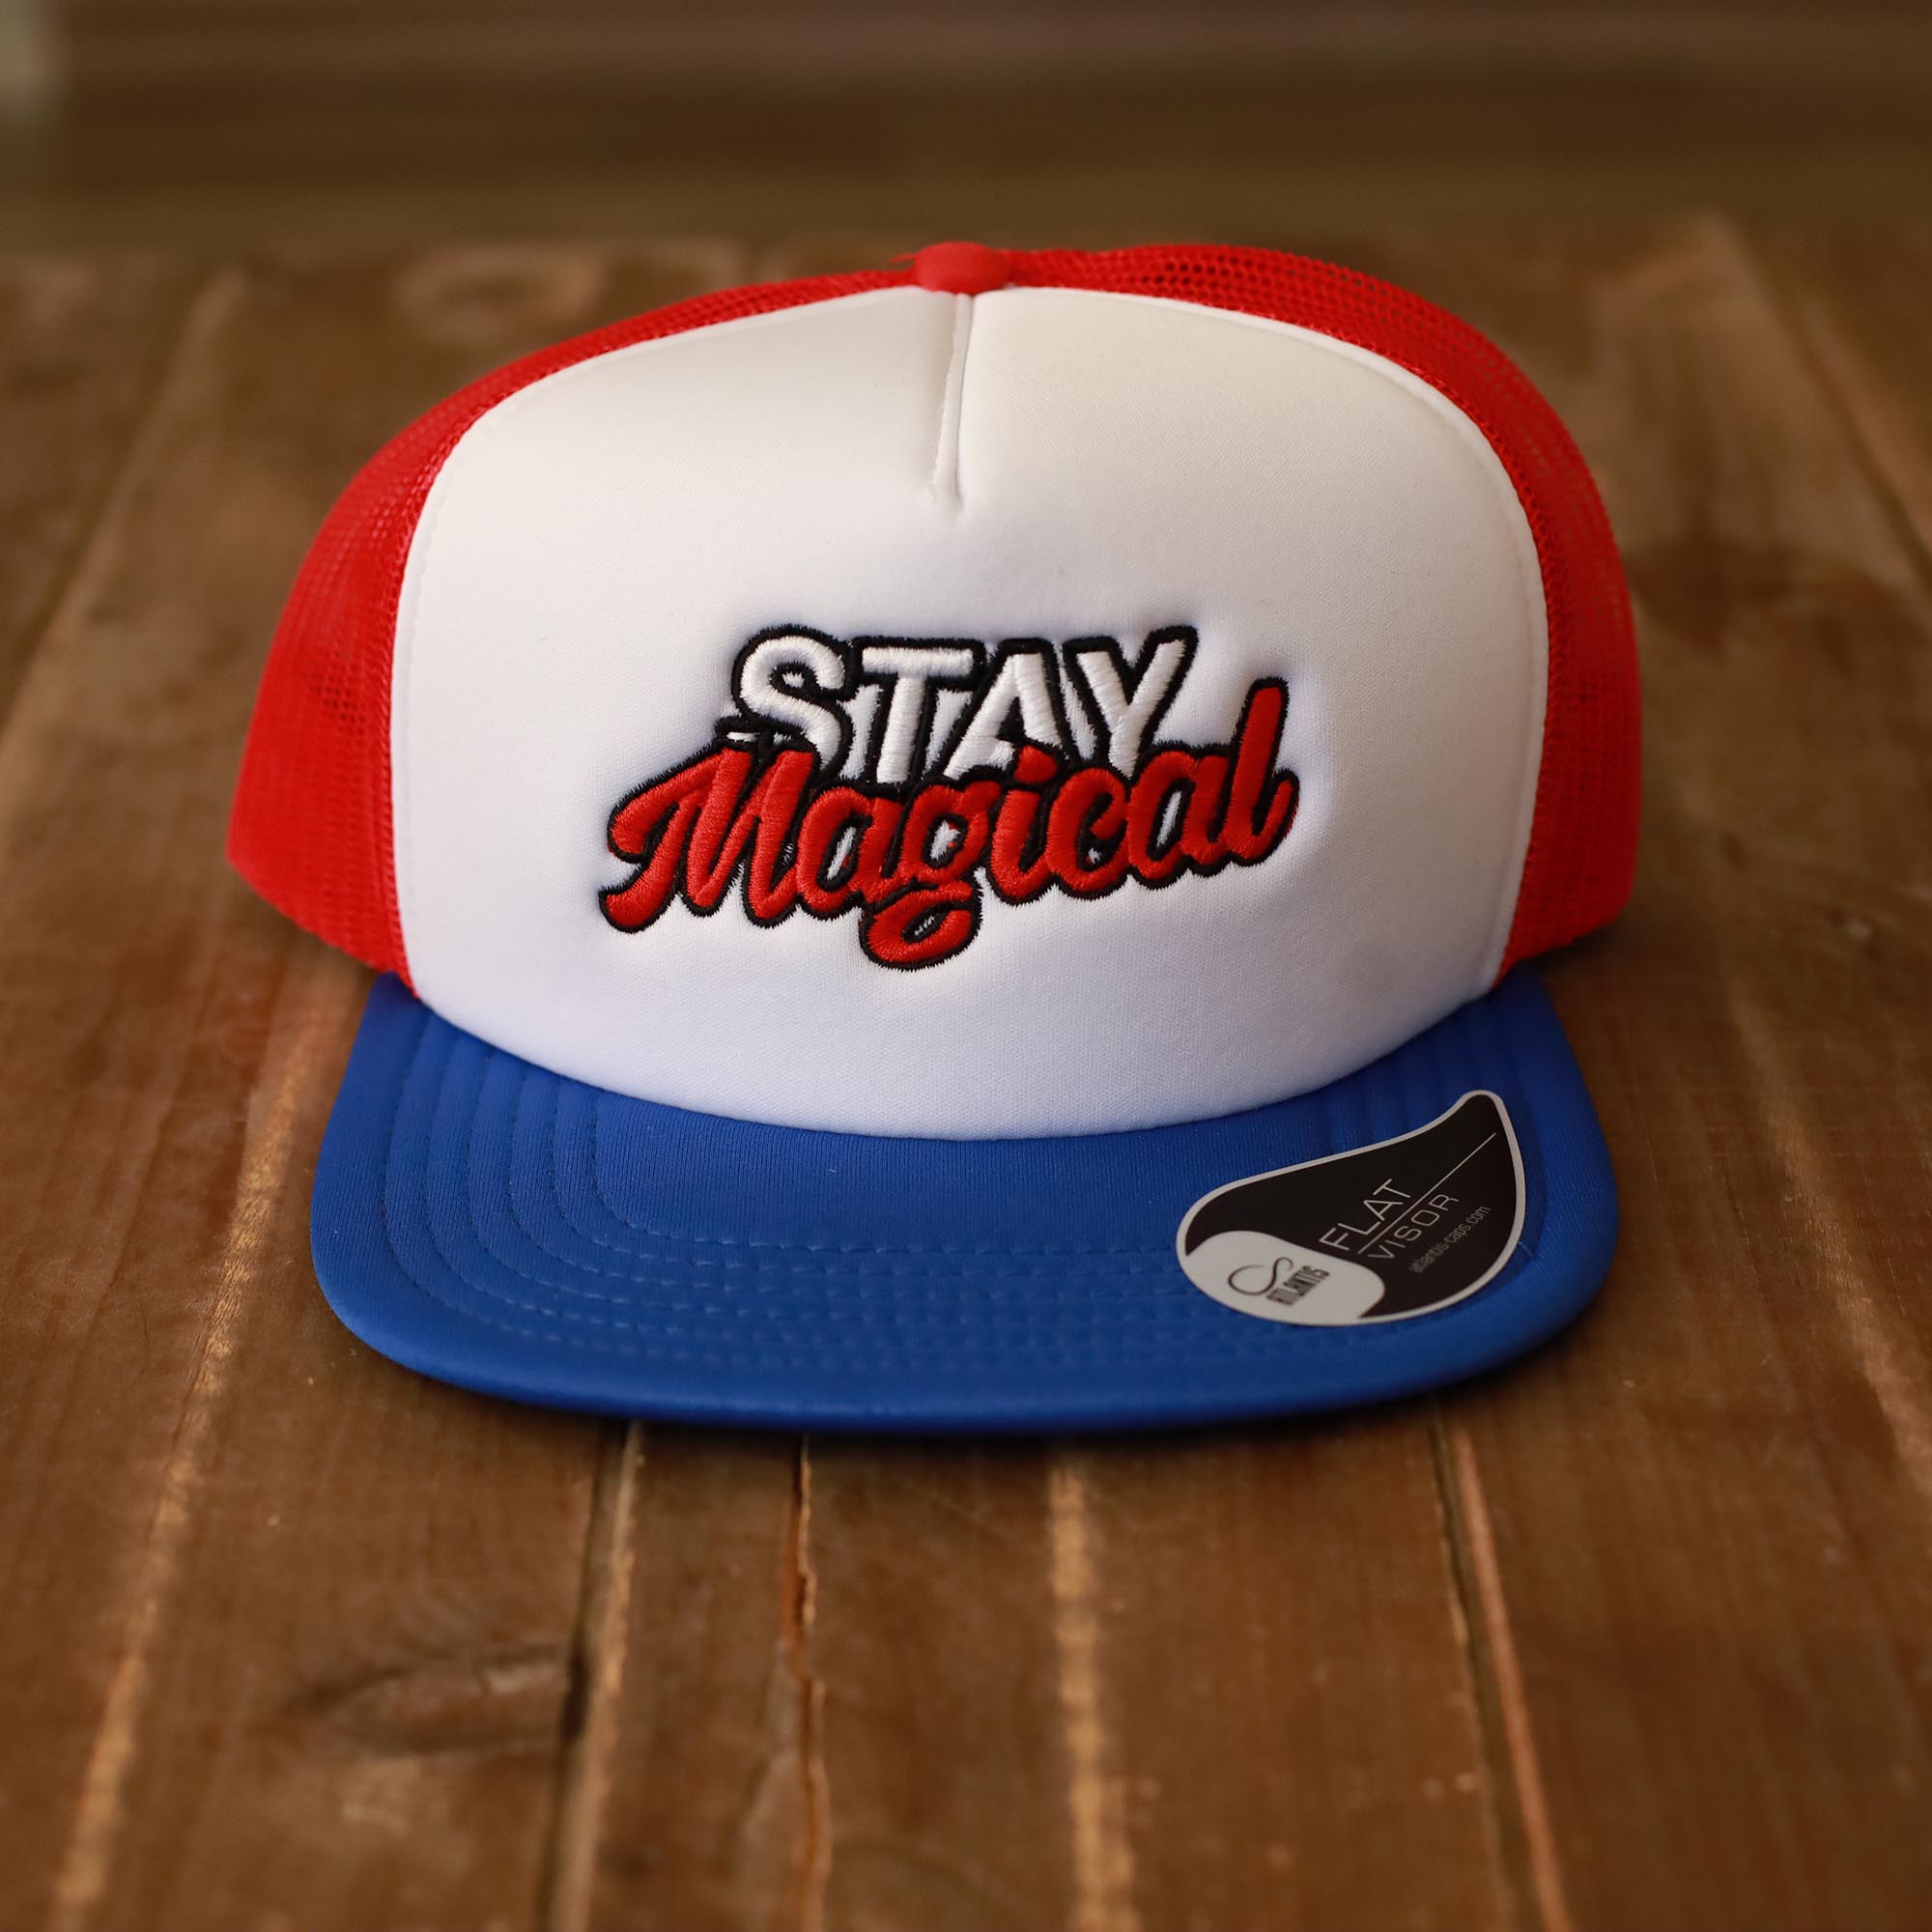 Stay Magical Hat